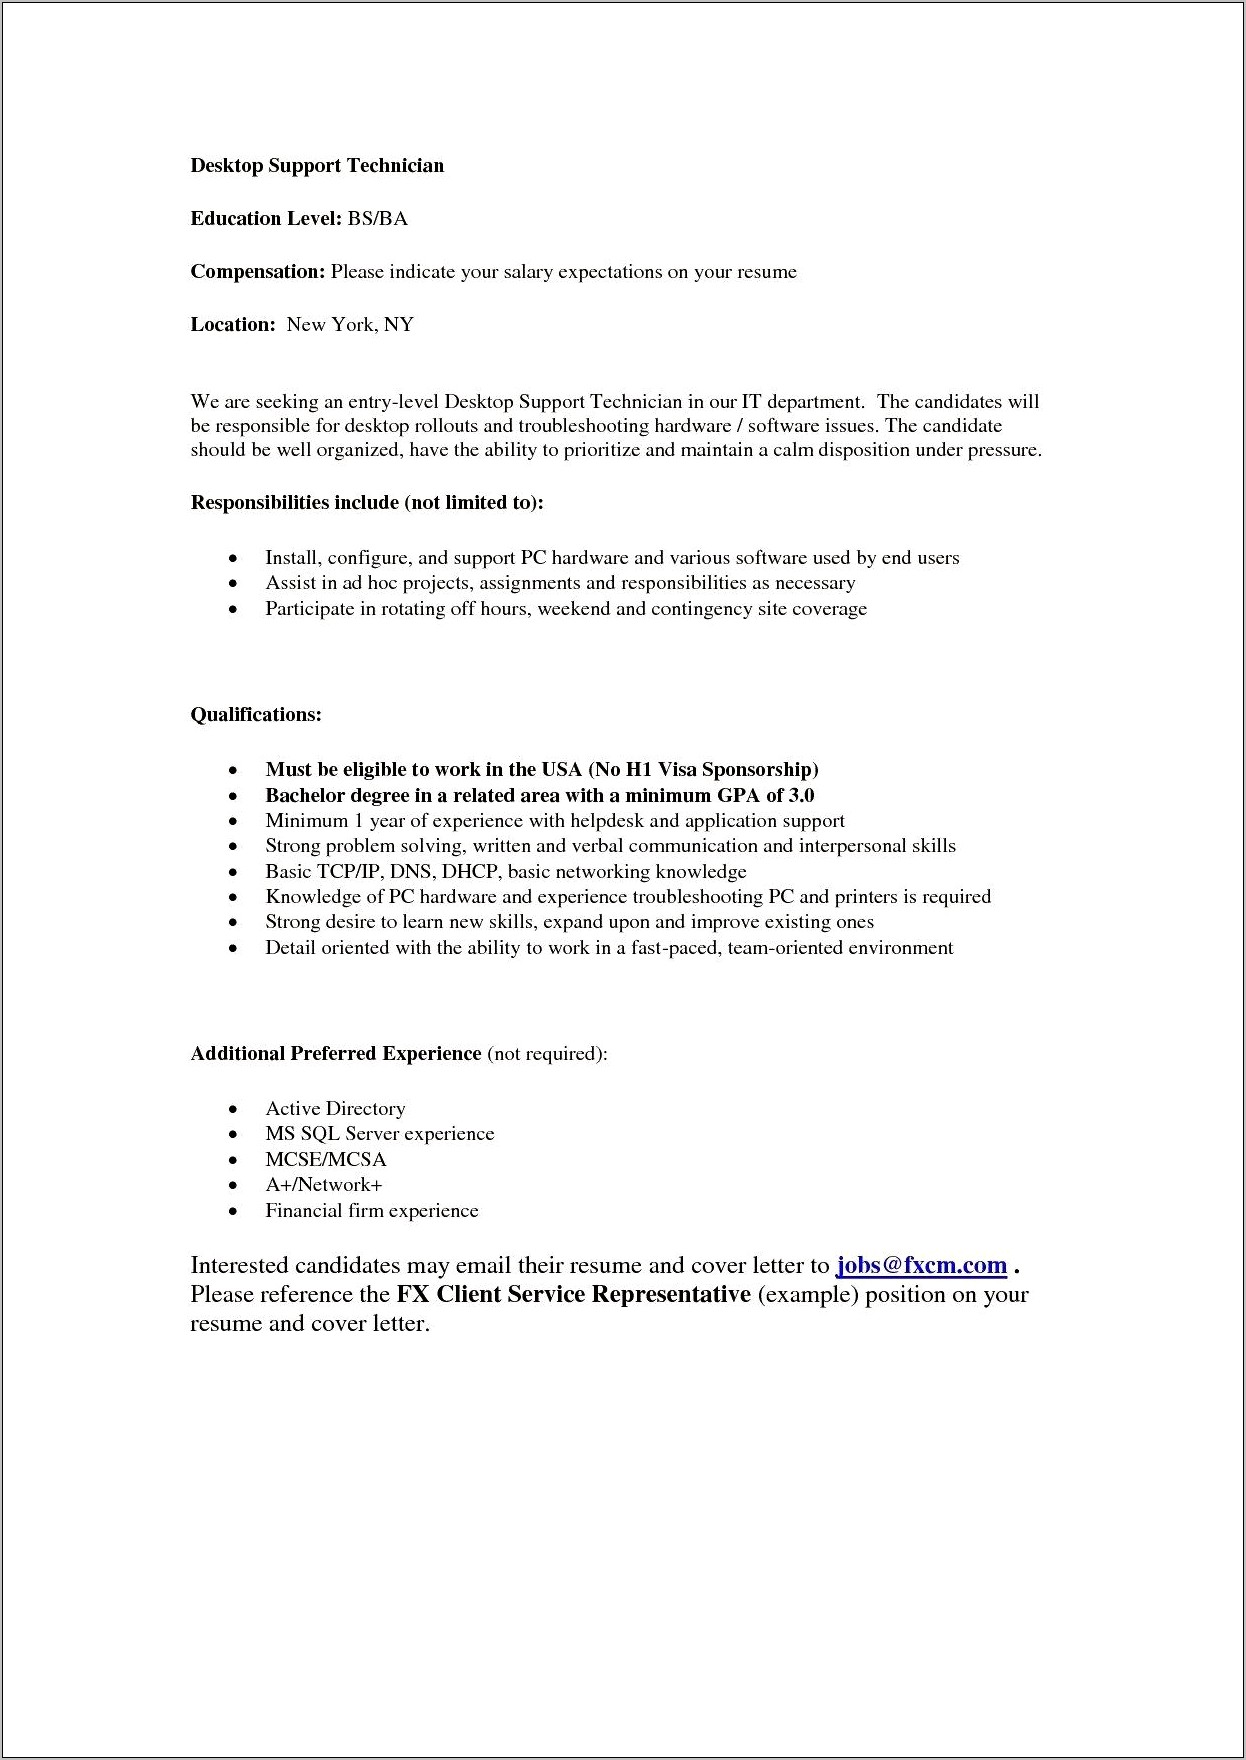 Resume Cover Letter With Salary Expectations